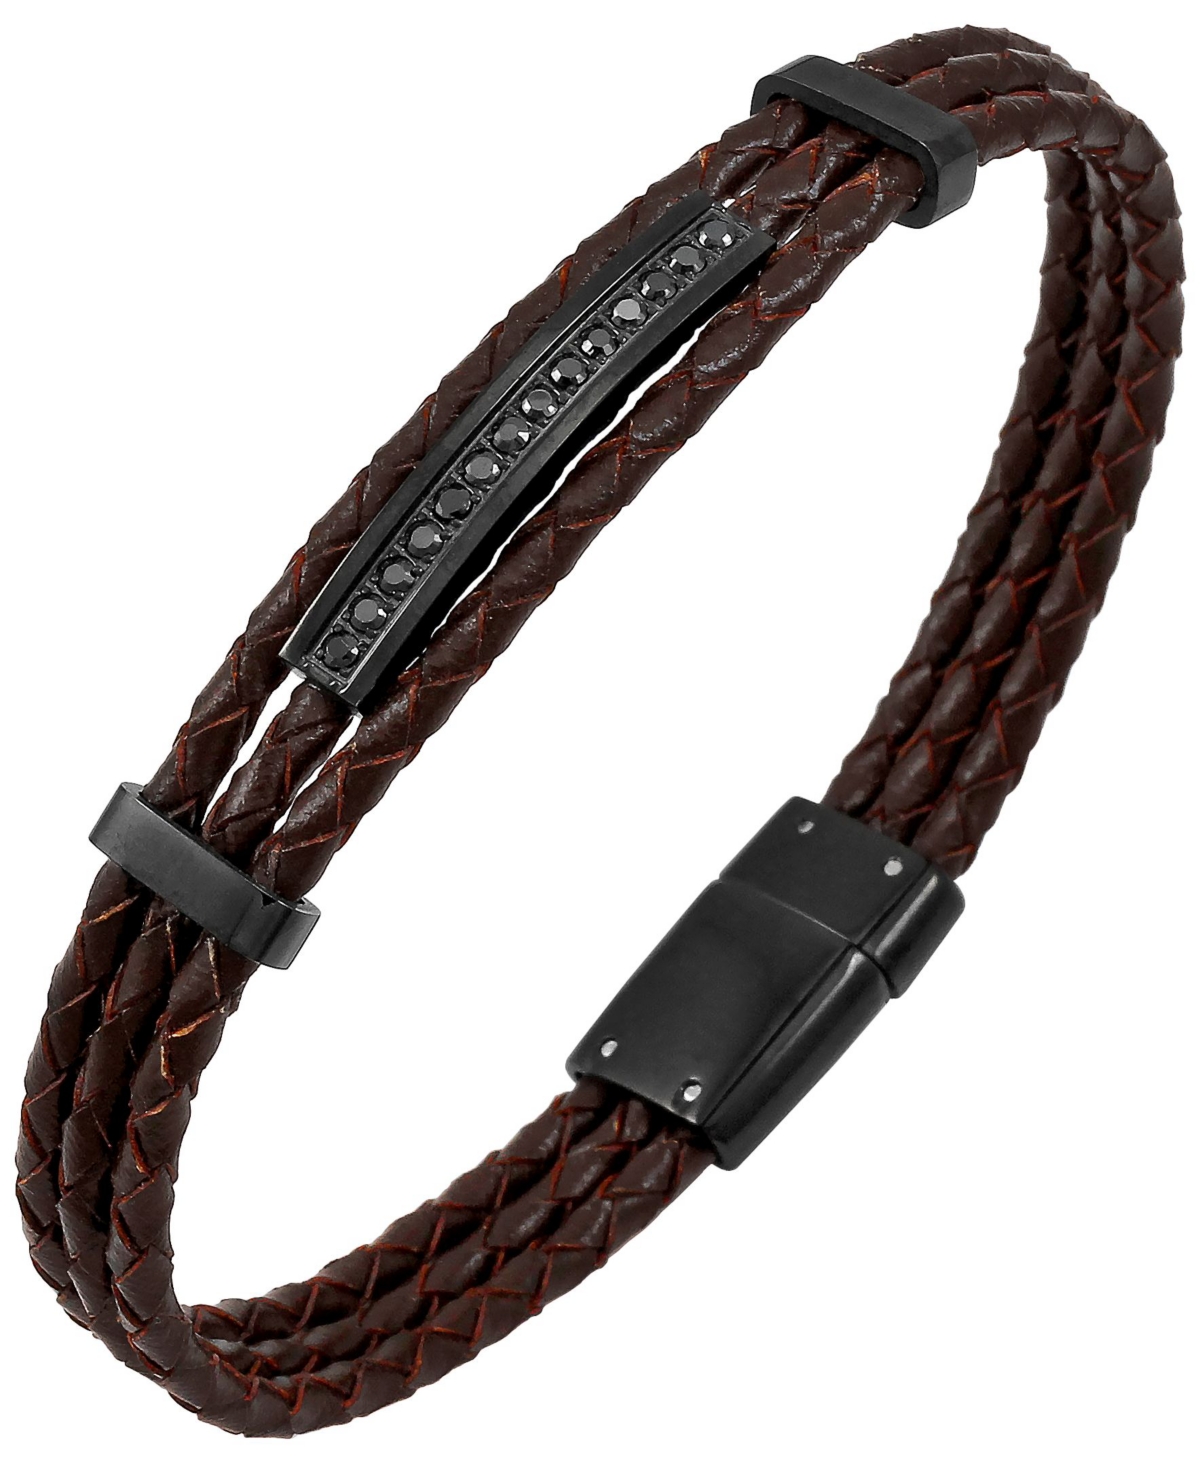 Sutton Stainless Steel And Braided Leather Bracelet With Cubic Zirconia Stations - Brown